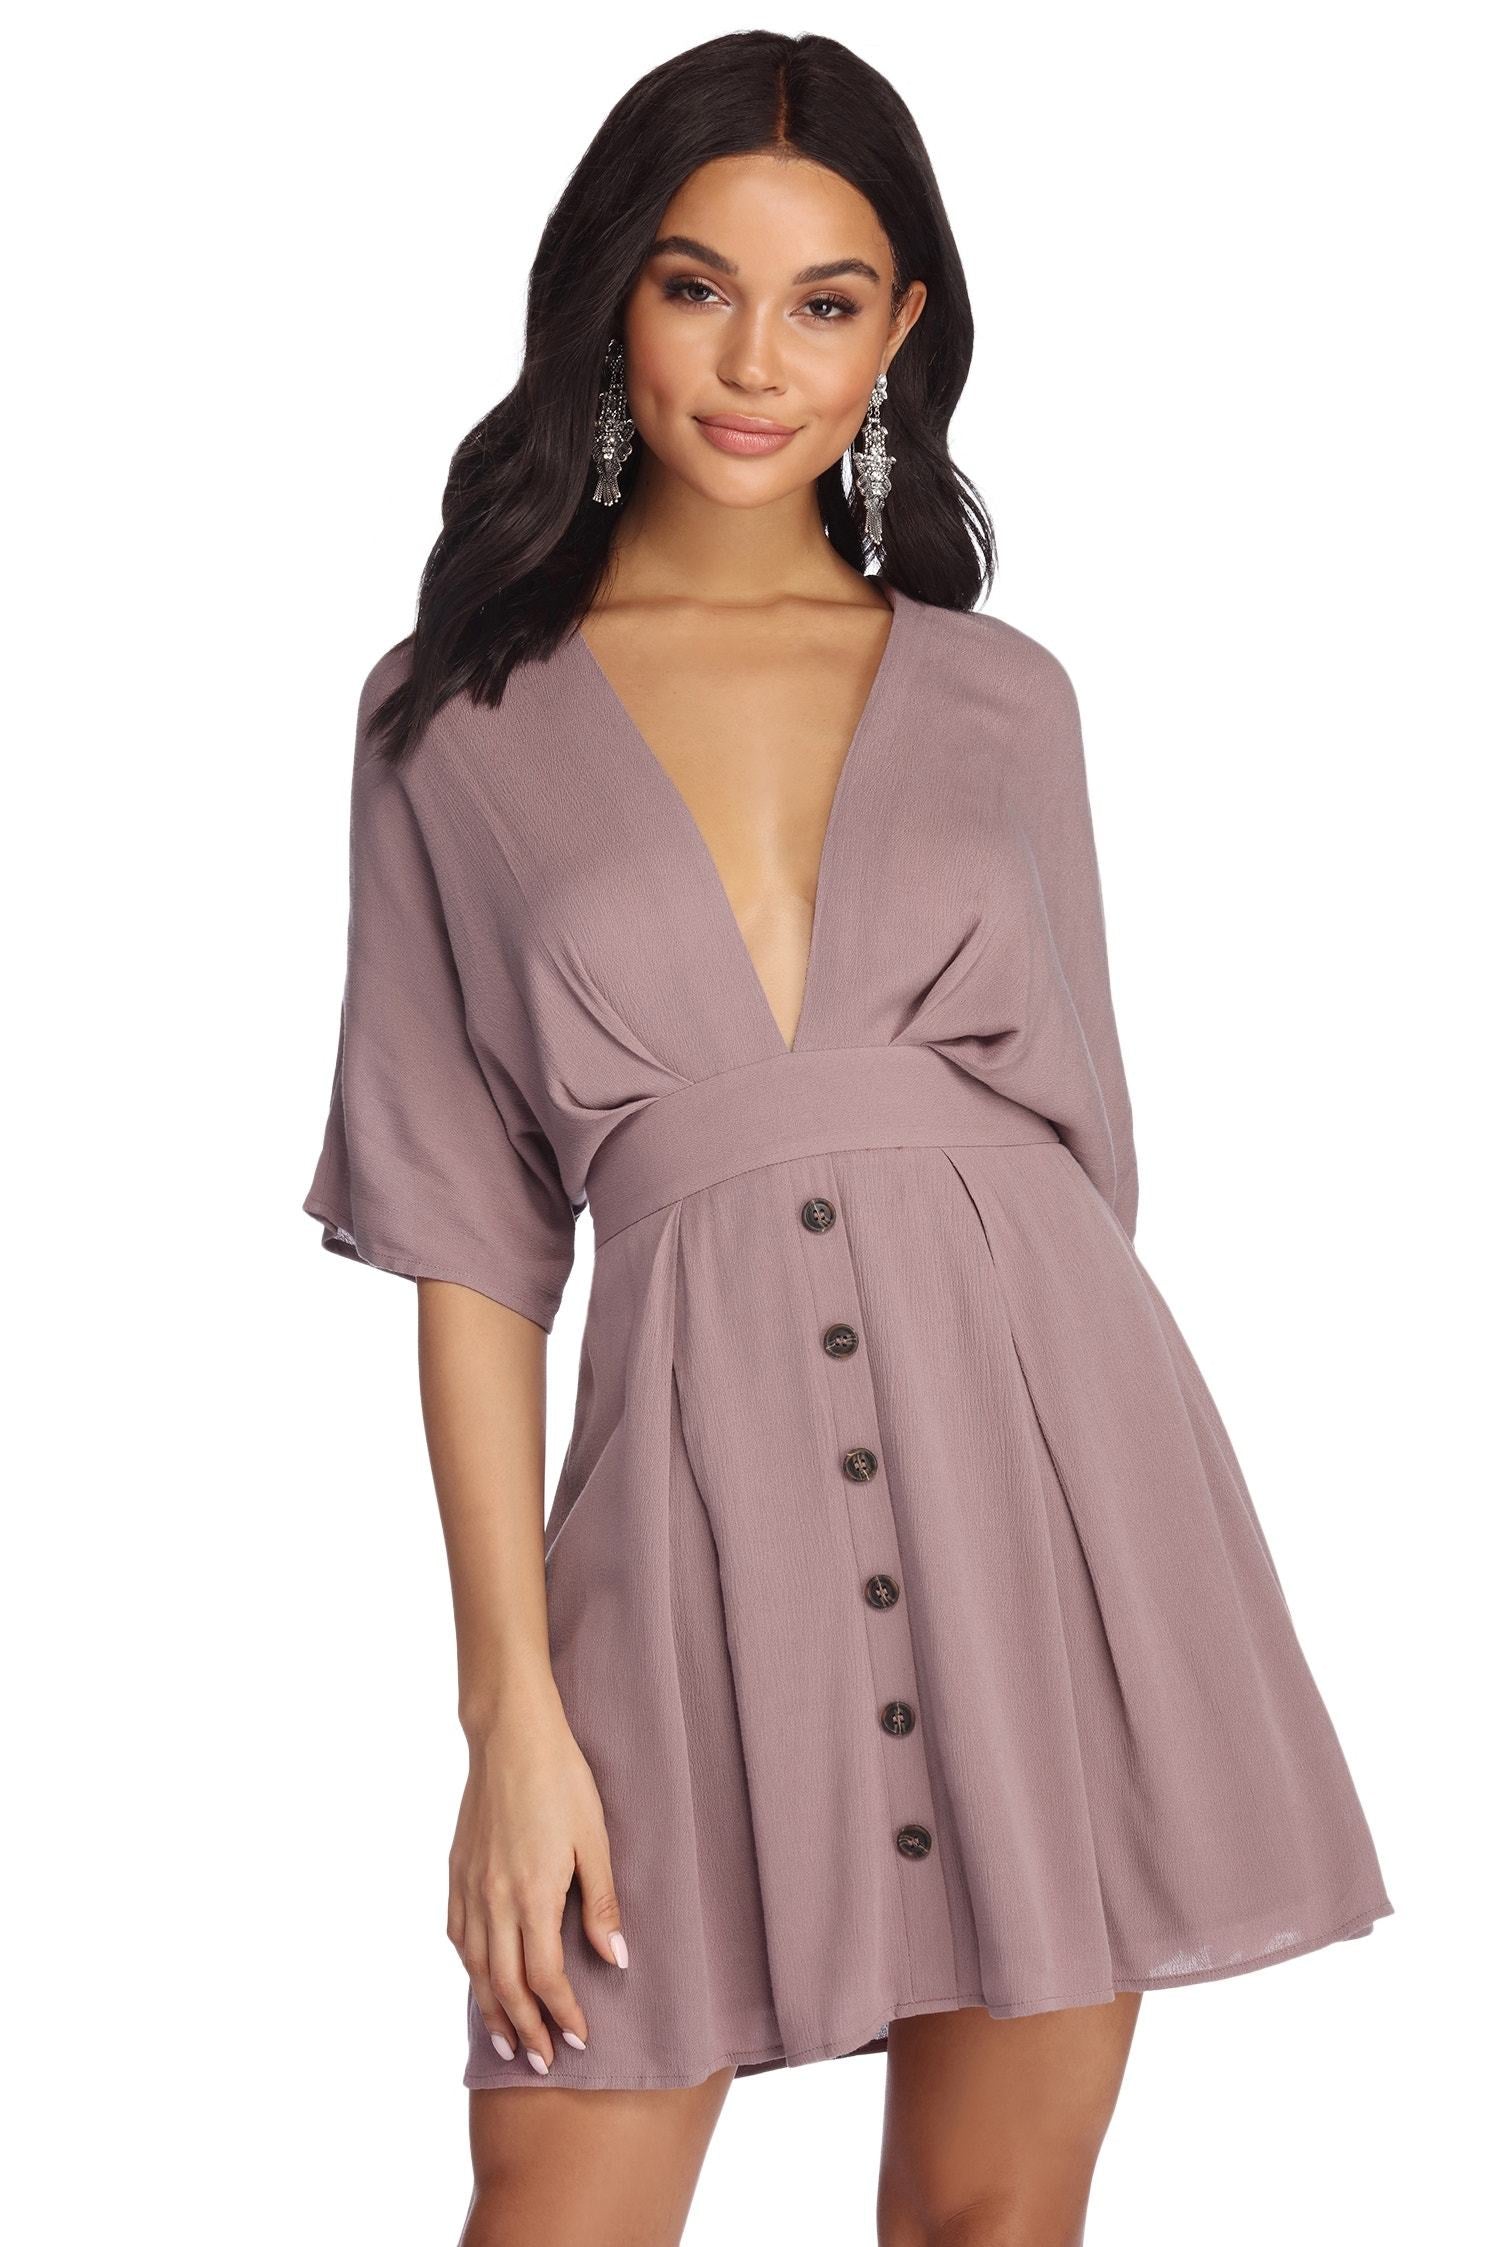 Beautifully Buttoned Skater Dress - Lady Occasions